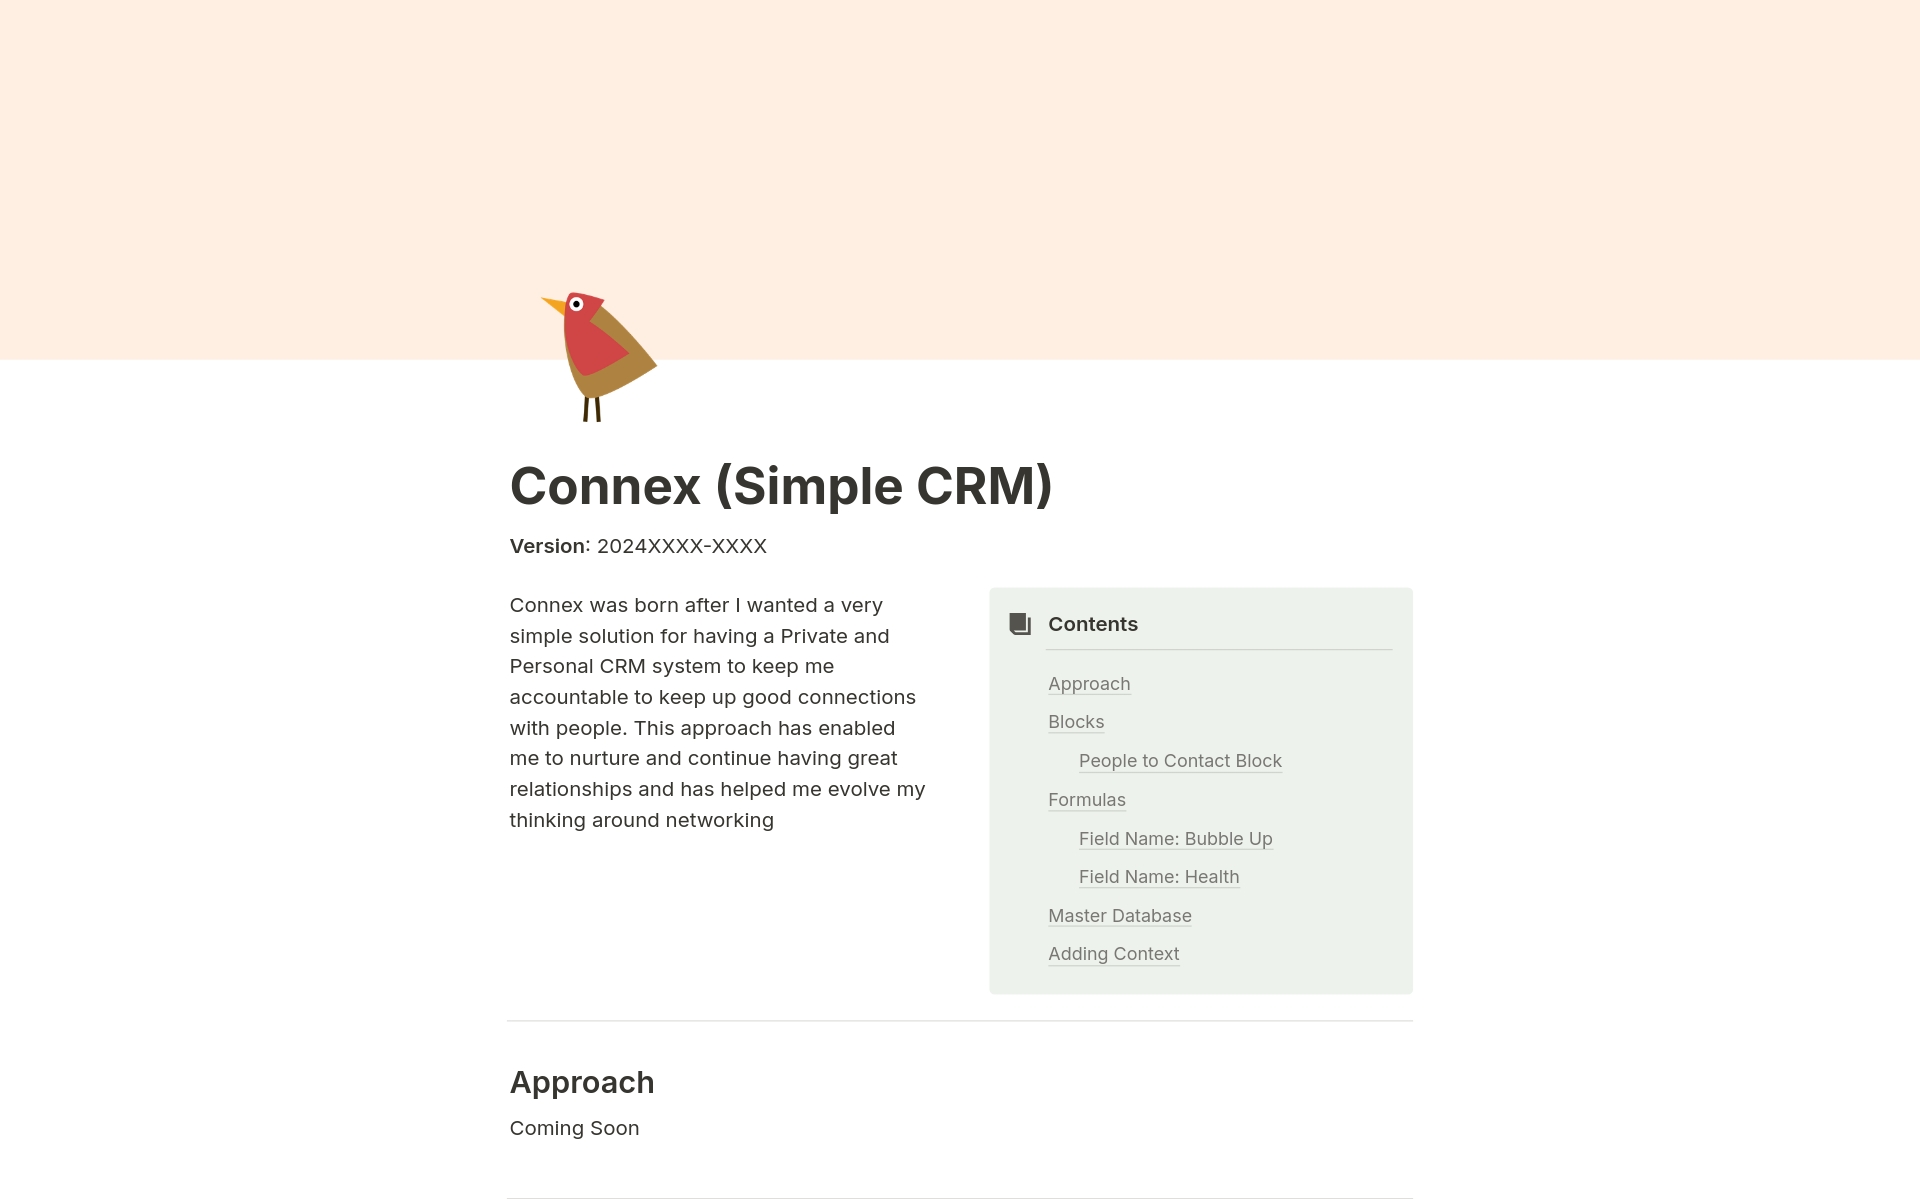 Connex is a minimal personal CRM system designed to manage contacts and remind you when to reconnect. Its simplicity allows for easy customization to suit your needs